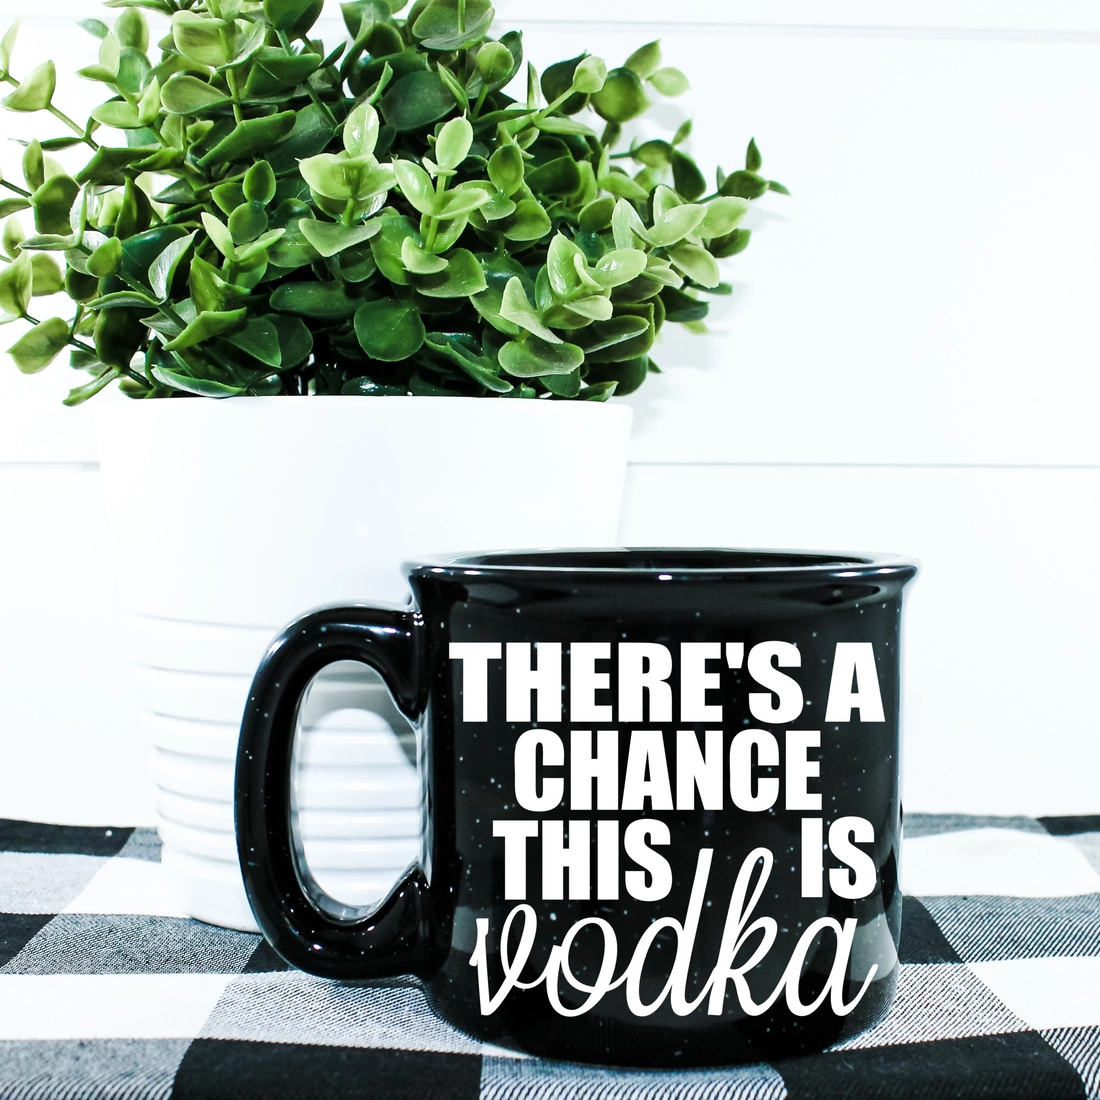 There's a Chance This is Vodka Camp Mug